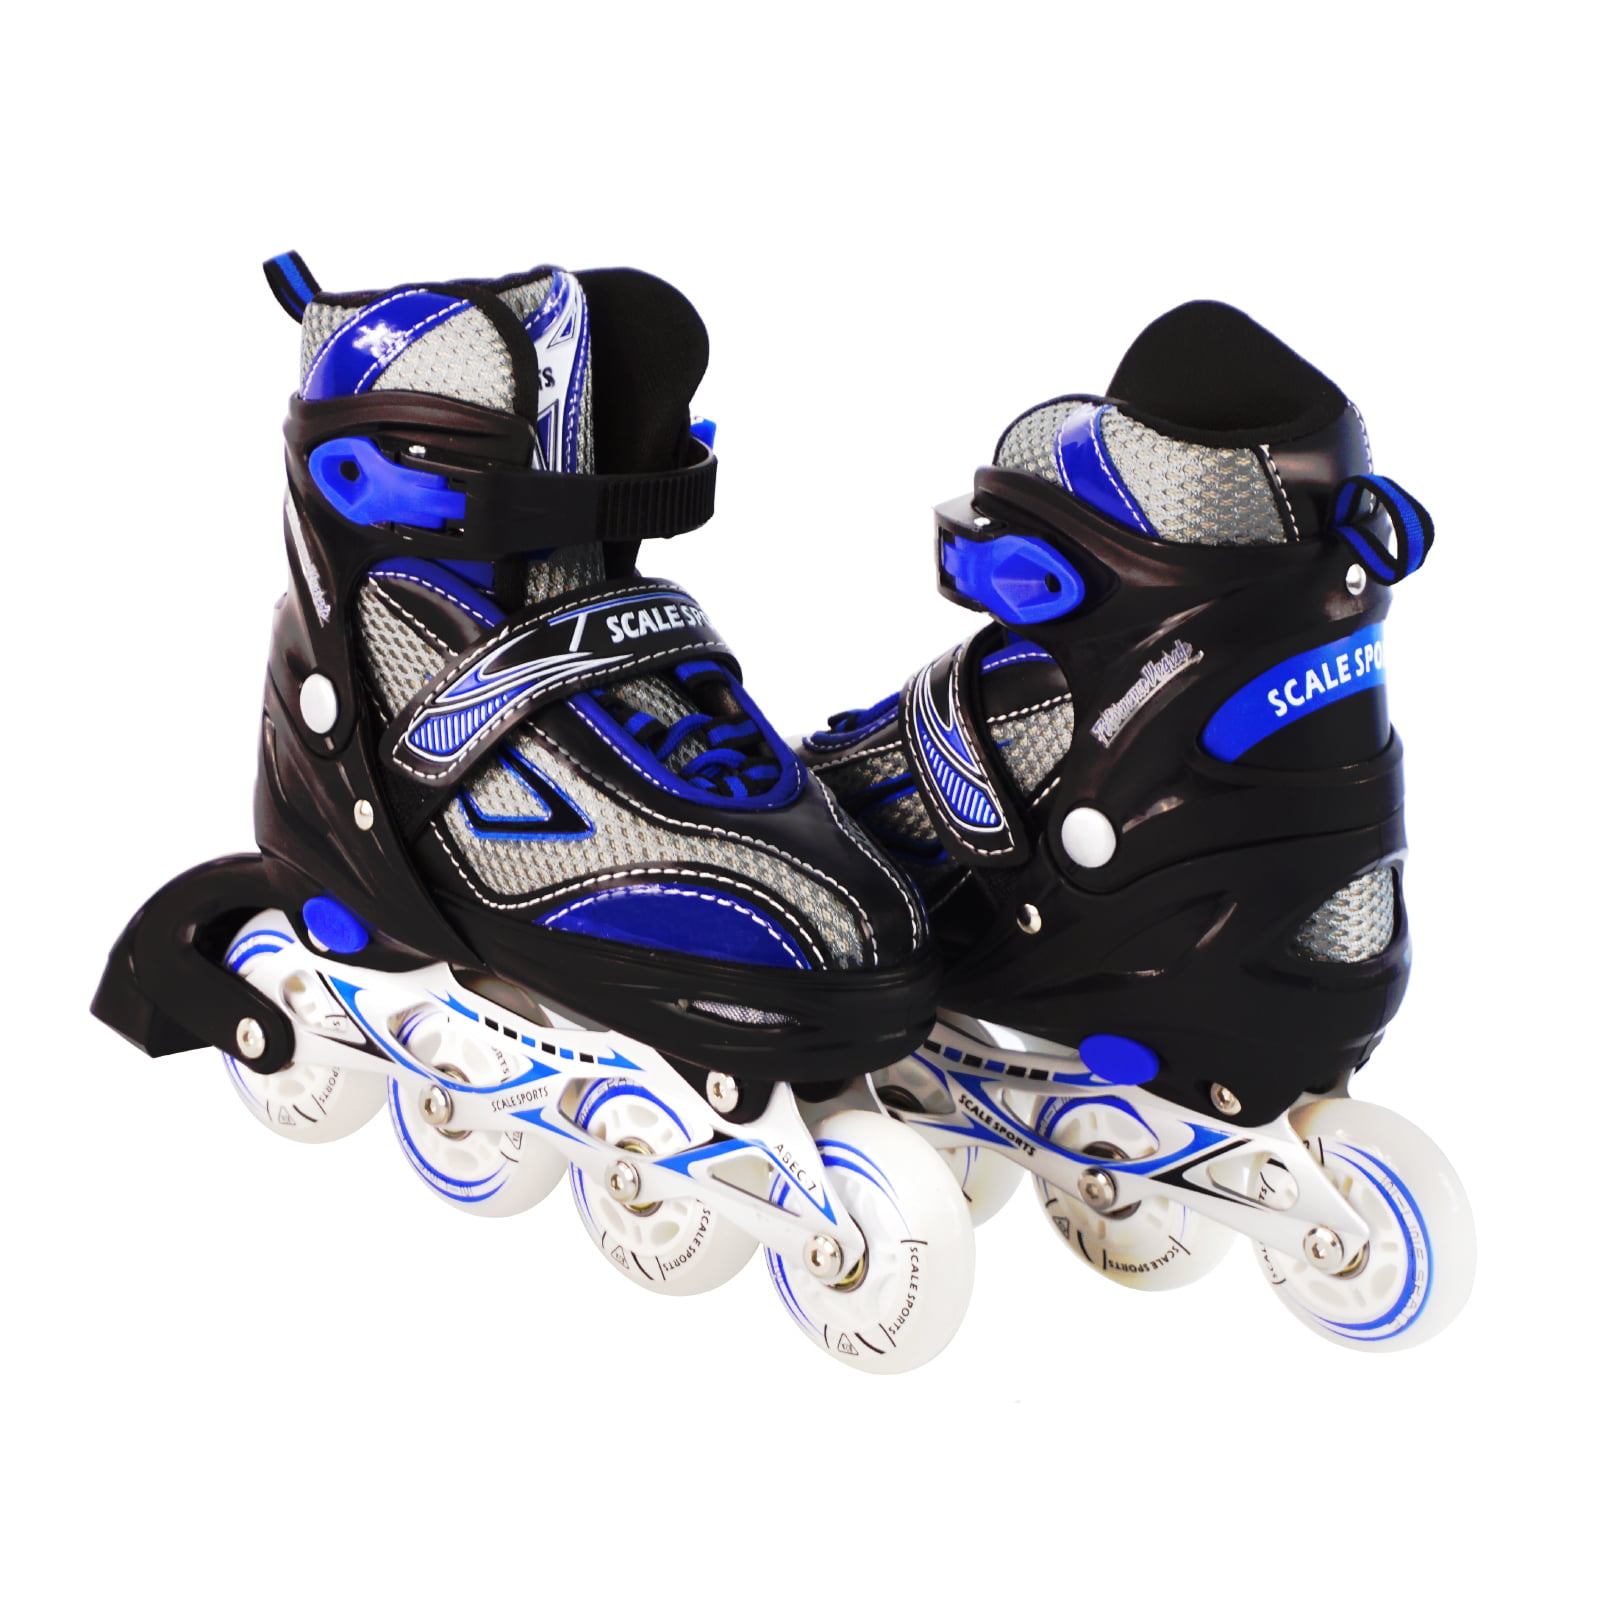 Banwei Adjustable Inline Skates for Girls and Boys Size 13.5J to 6 Illuminating Front Wheel Safe Durable Roller Skates Outdoor Indoor Use 